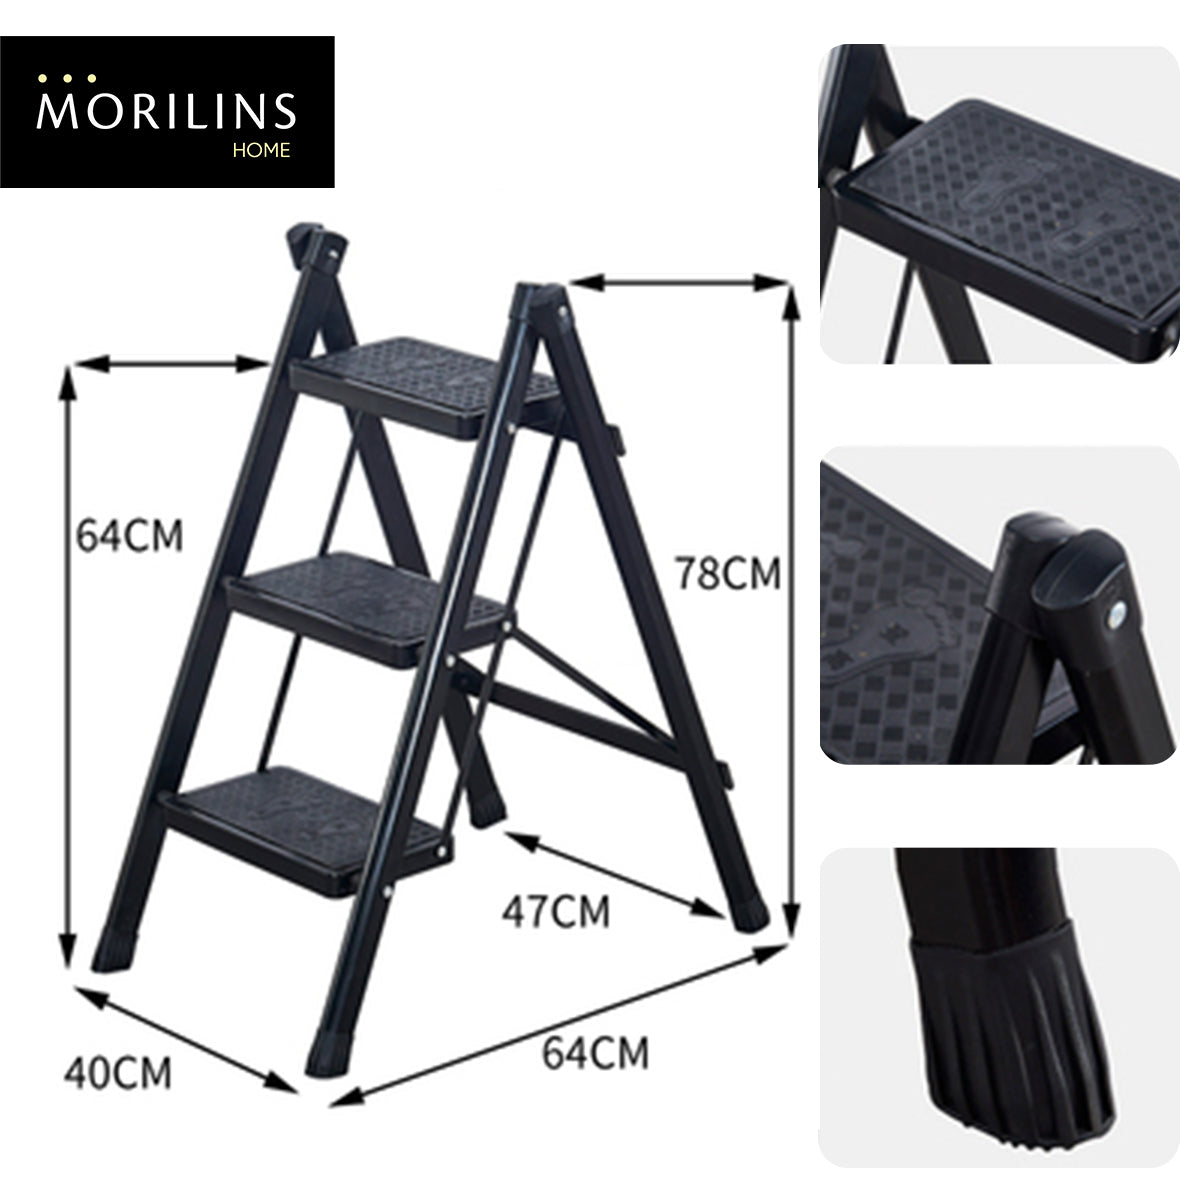 [Morilins Home] 3-Step Ladder Lightweight Folding Step Stool - Wide Anti-Slip Pedal, Supports up to 200kg, Household and Office Portable Stepladder - Bloom Concept